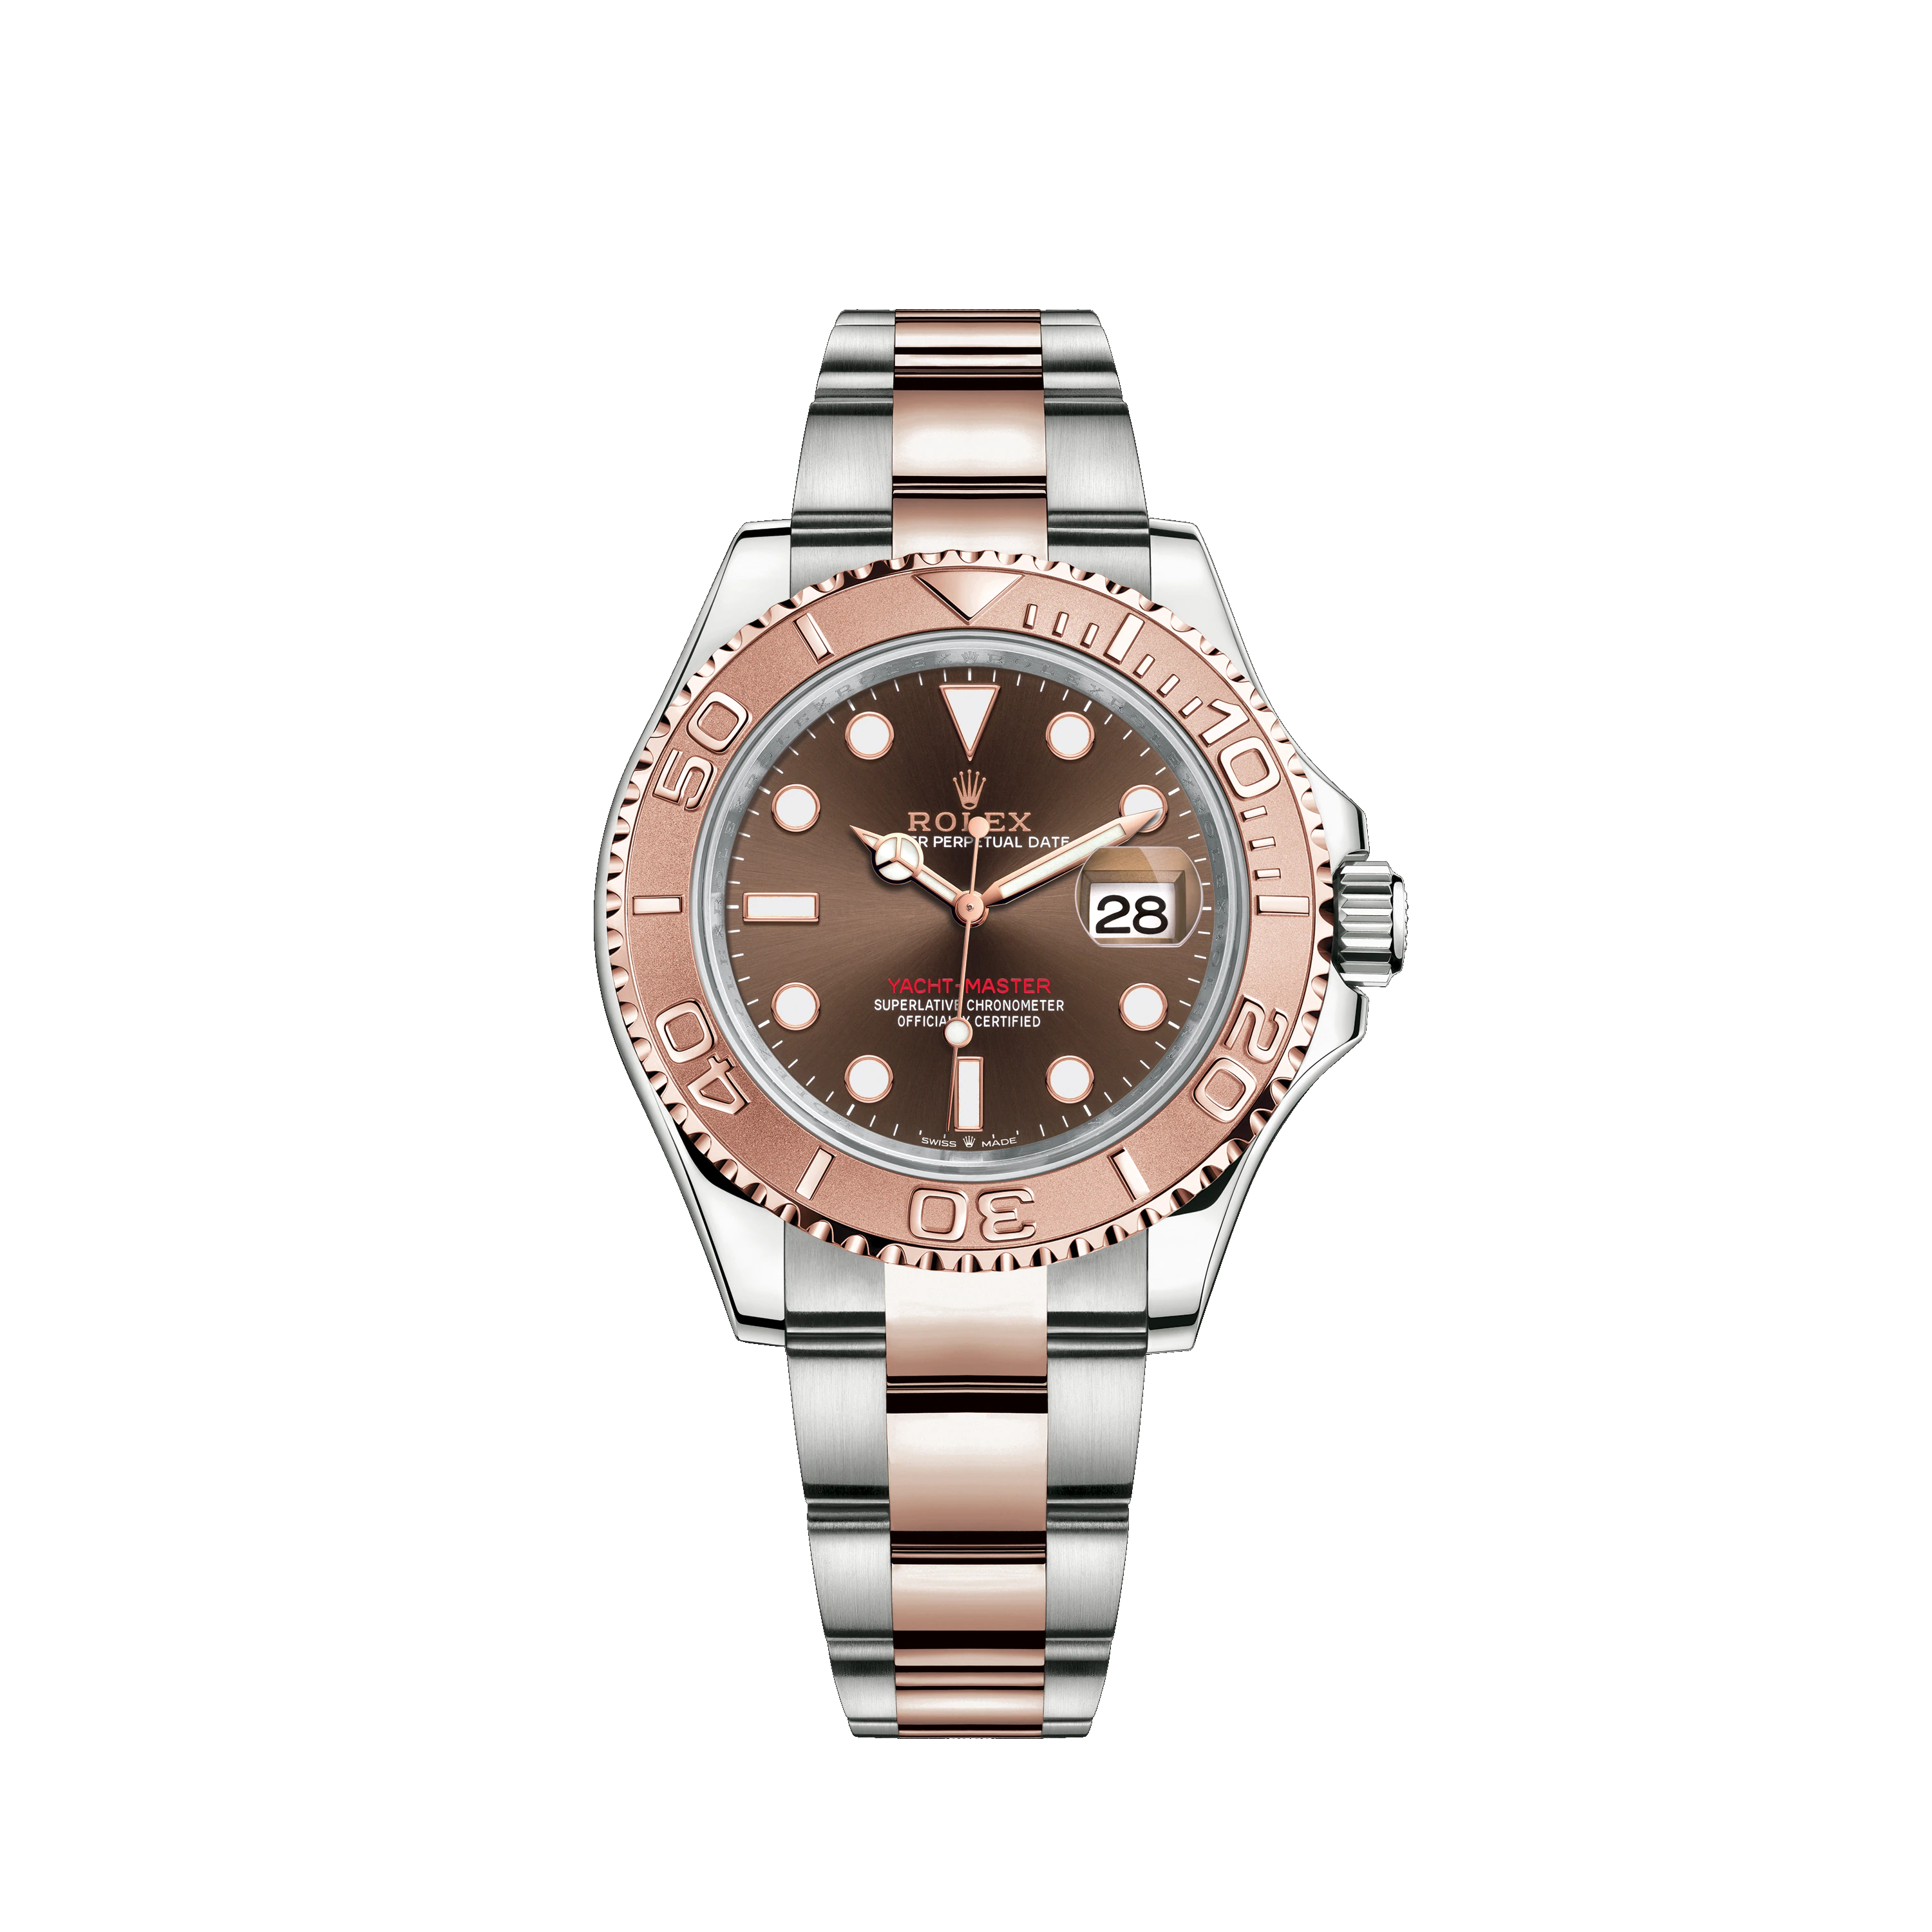 Yacht-Master 40 126621 Rose Gold & Stainless Steel Watch (Chocolate)